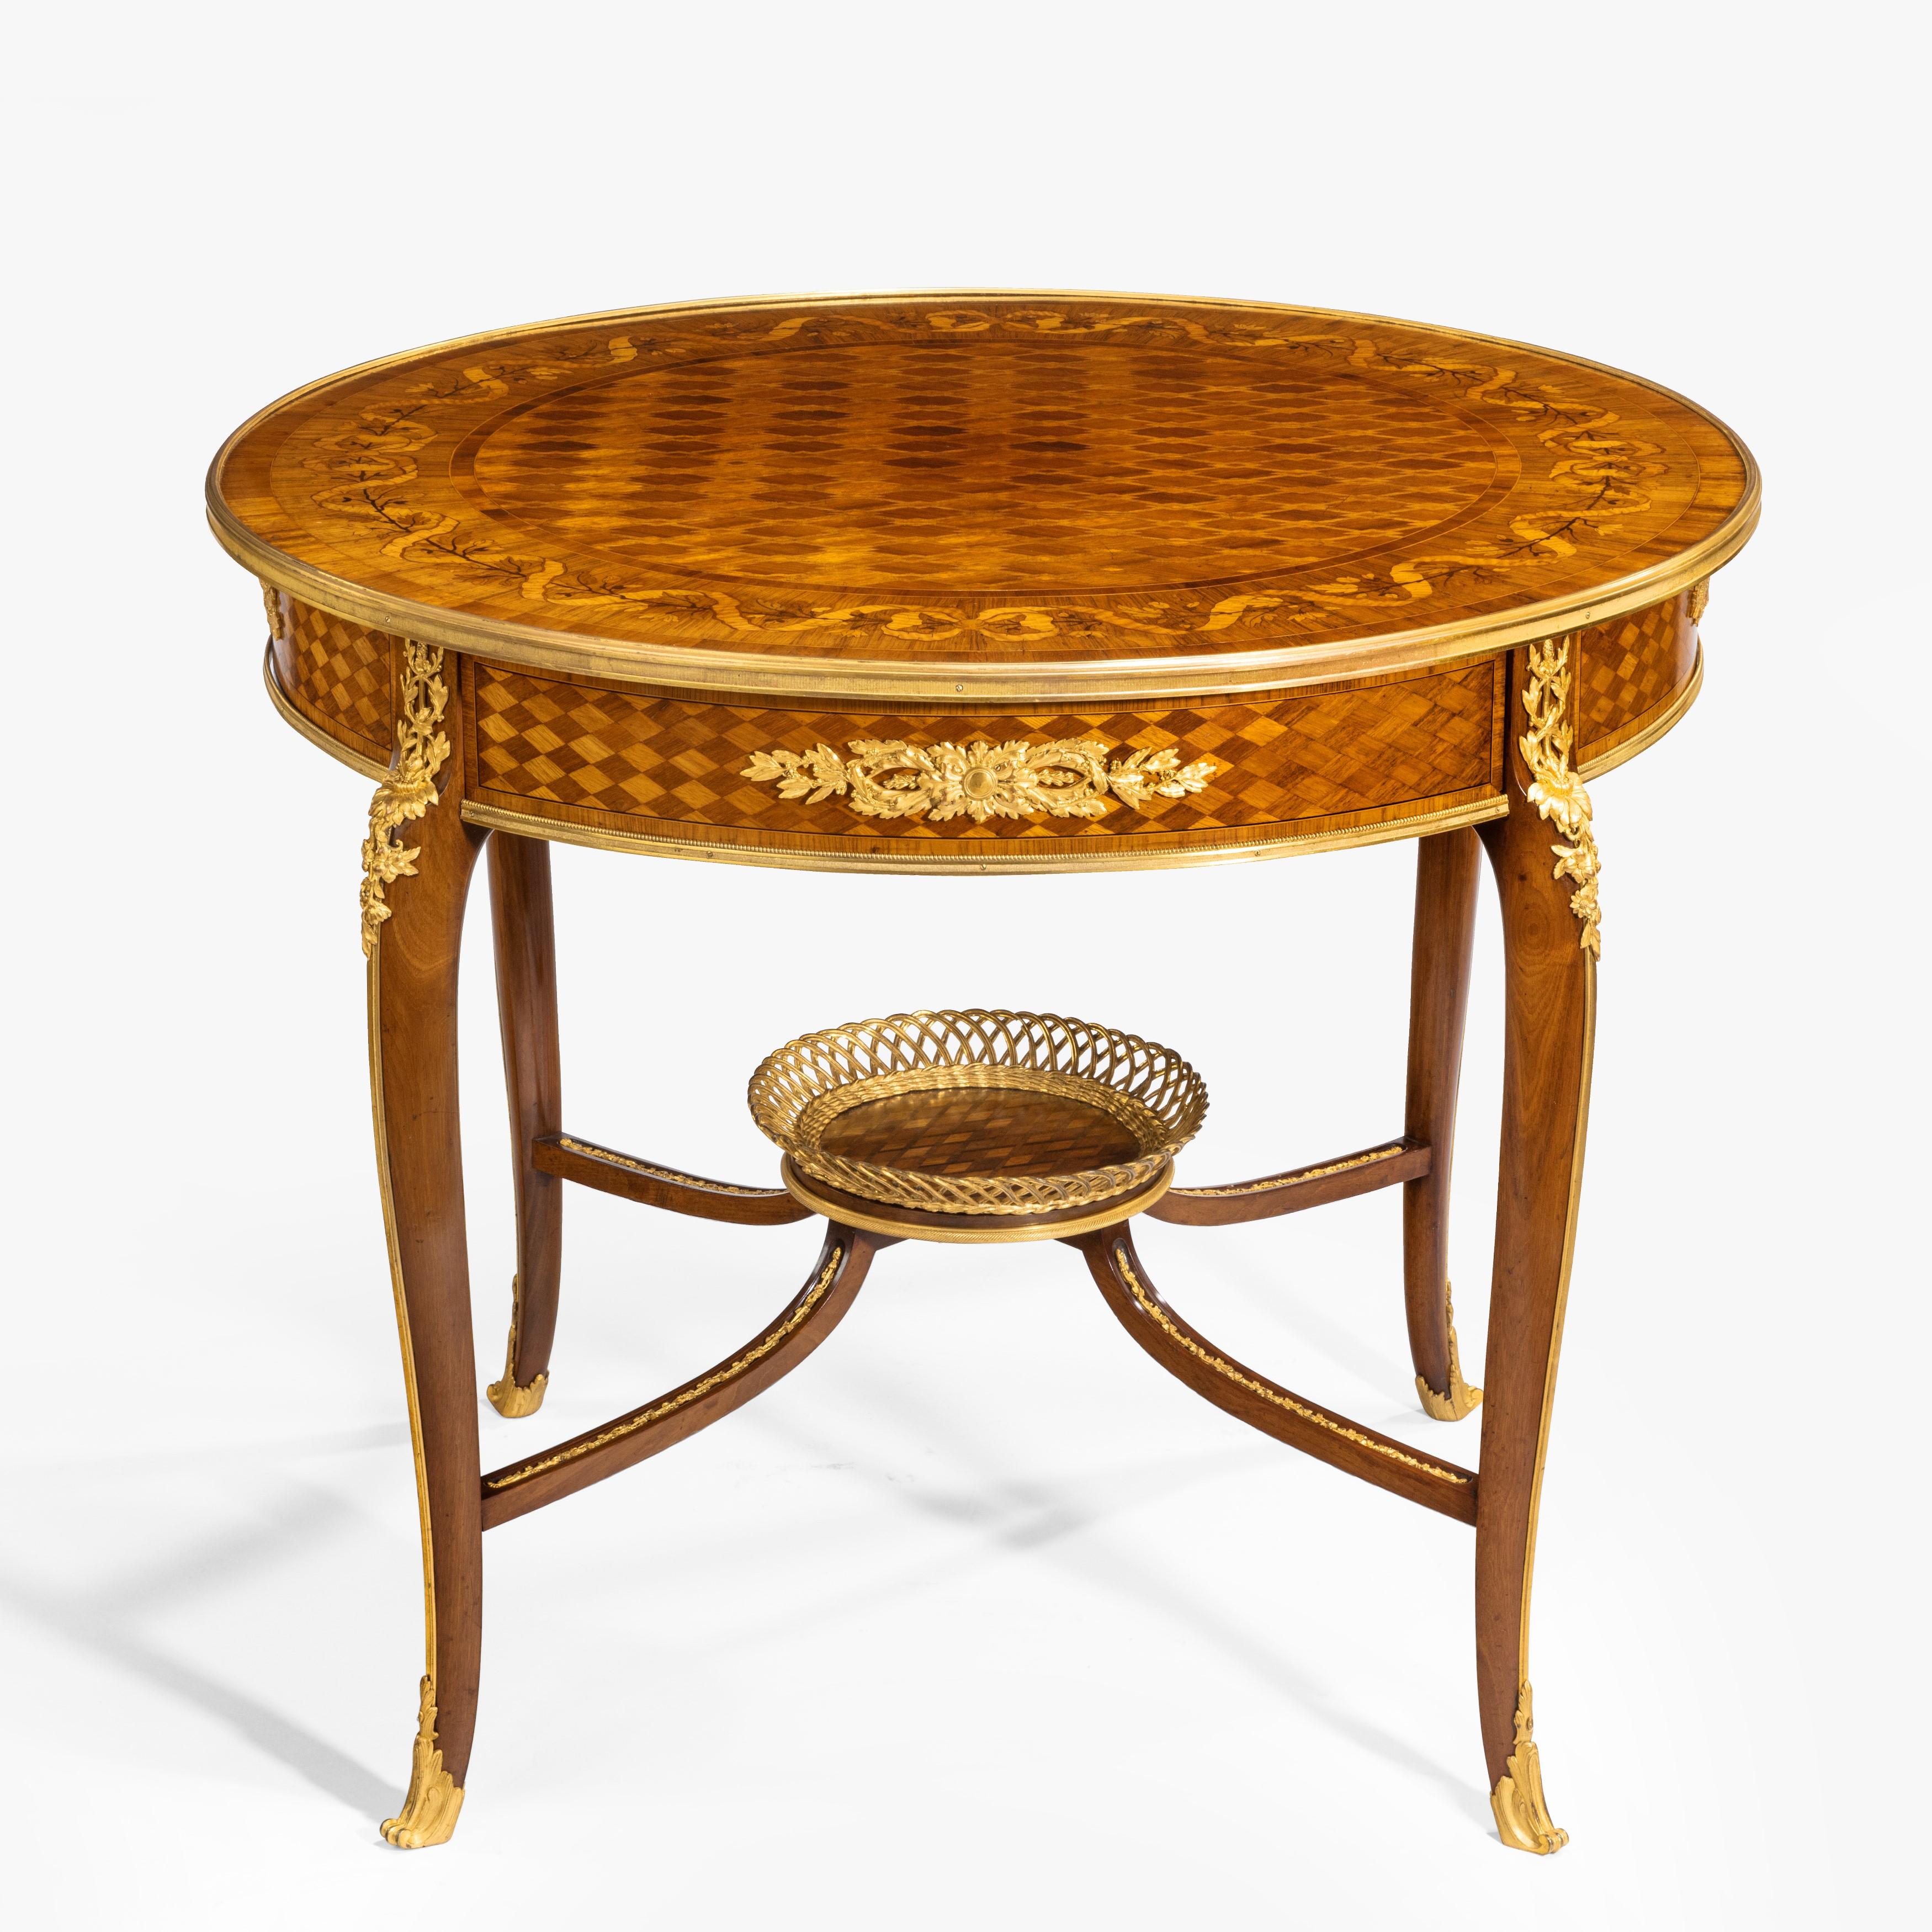 A Louis XVI style parquetry centre table
firmly attributed to François Linke

Constructed in Kingwood, Tulipwood and Mahogany, with foliate inlay work, parquetry and Fine ormolu bronze mounts; of free-standing circular form, the ormolu sabot